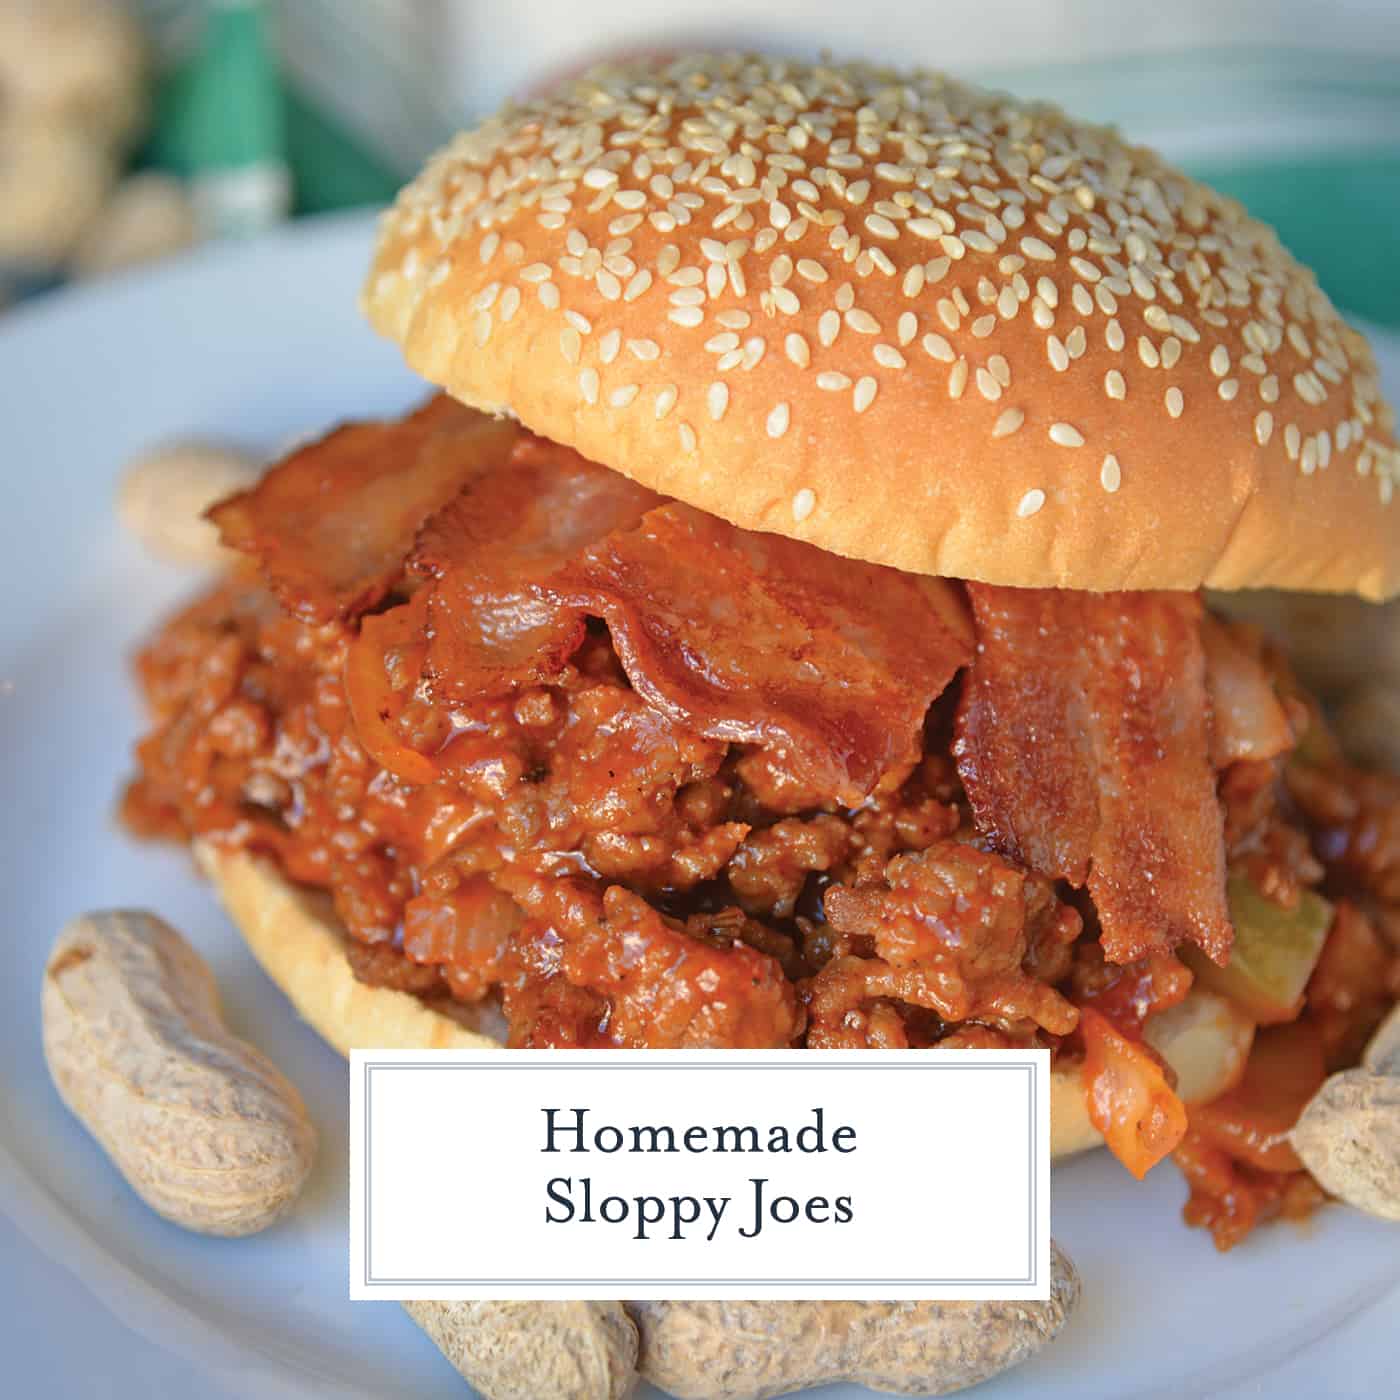 Homemade Sloppy Joes are so easy to make! Use my special sweet heat sloppy Joe sauce recipe with ground pork, beef, chicken or even turkey! #homemadesloppyjoes #sloppyjoesauce #sloppyjoerecipe www.savoryexperiments.com 